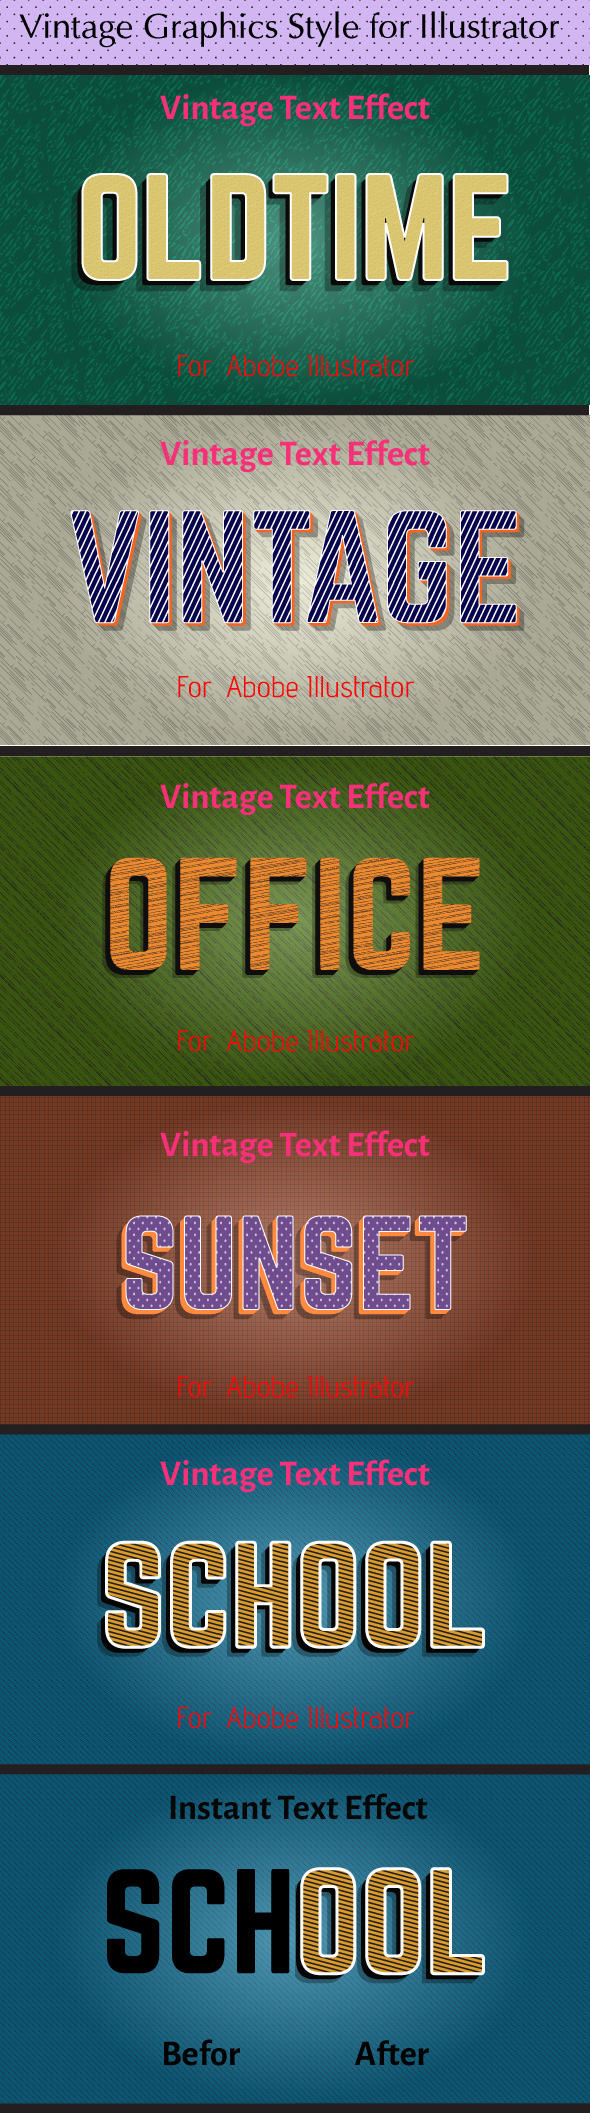  Vintage Graphics Style for Illustrator 